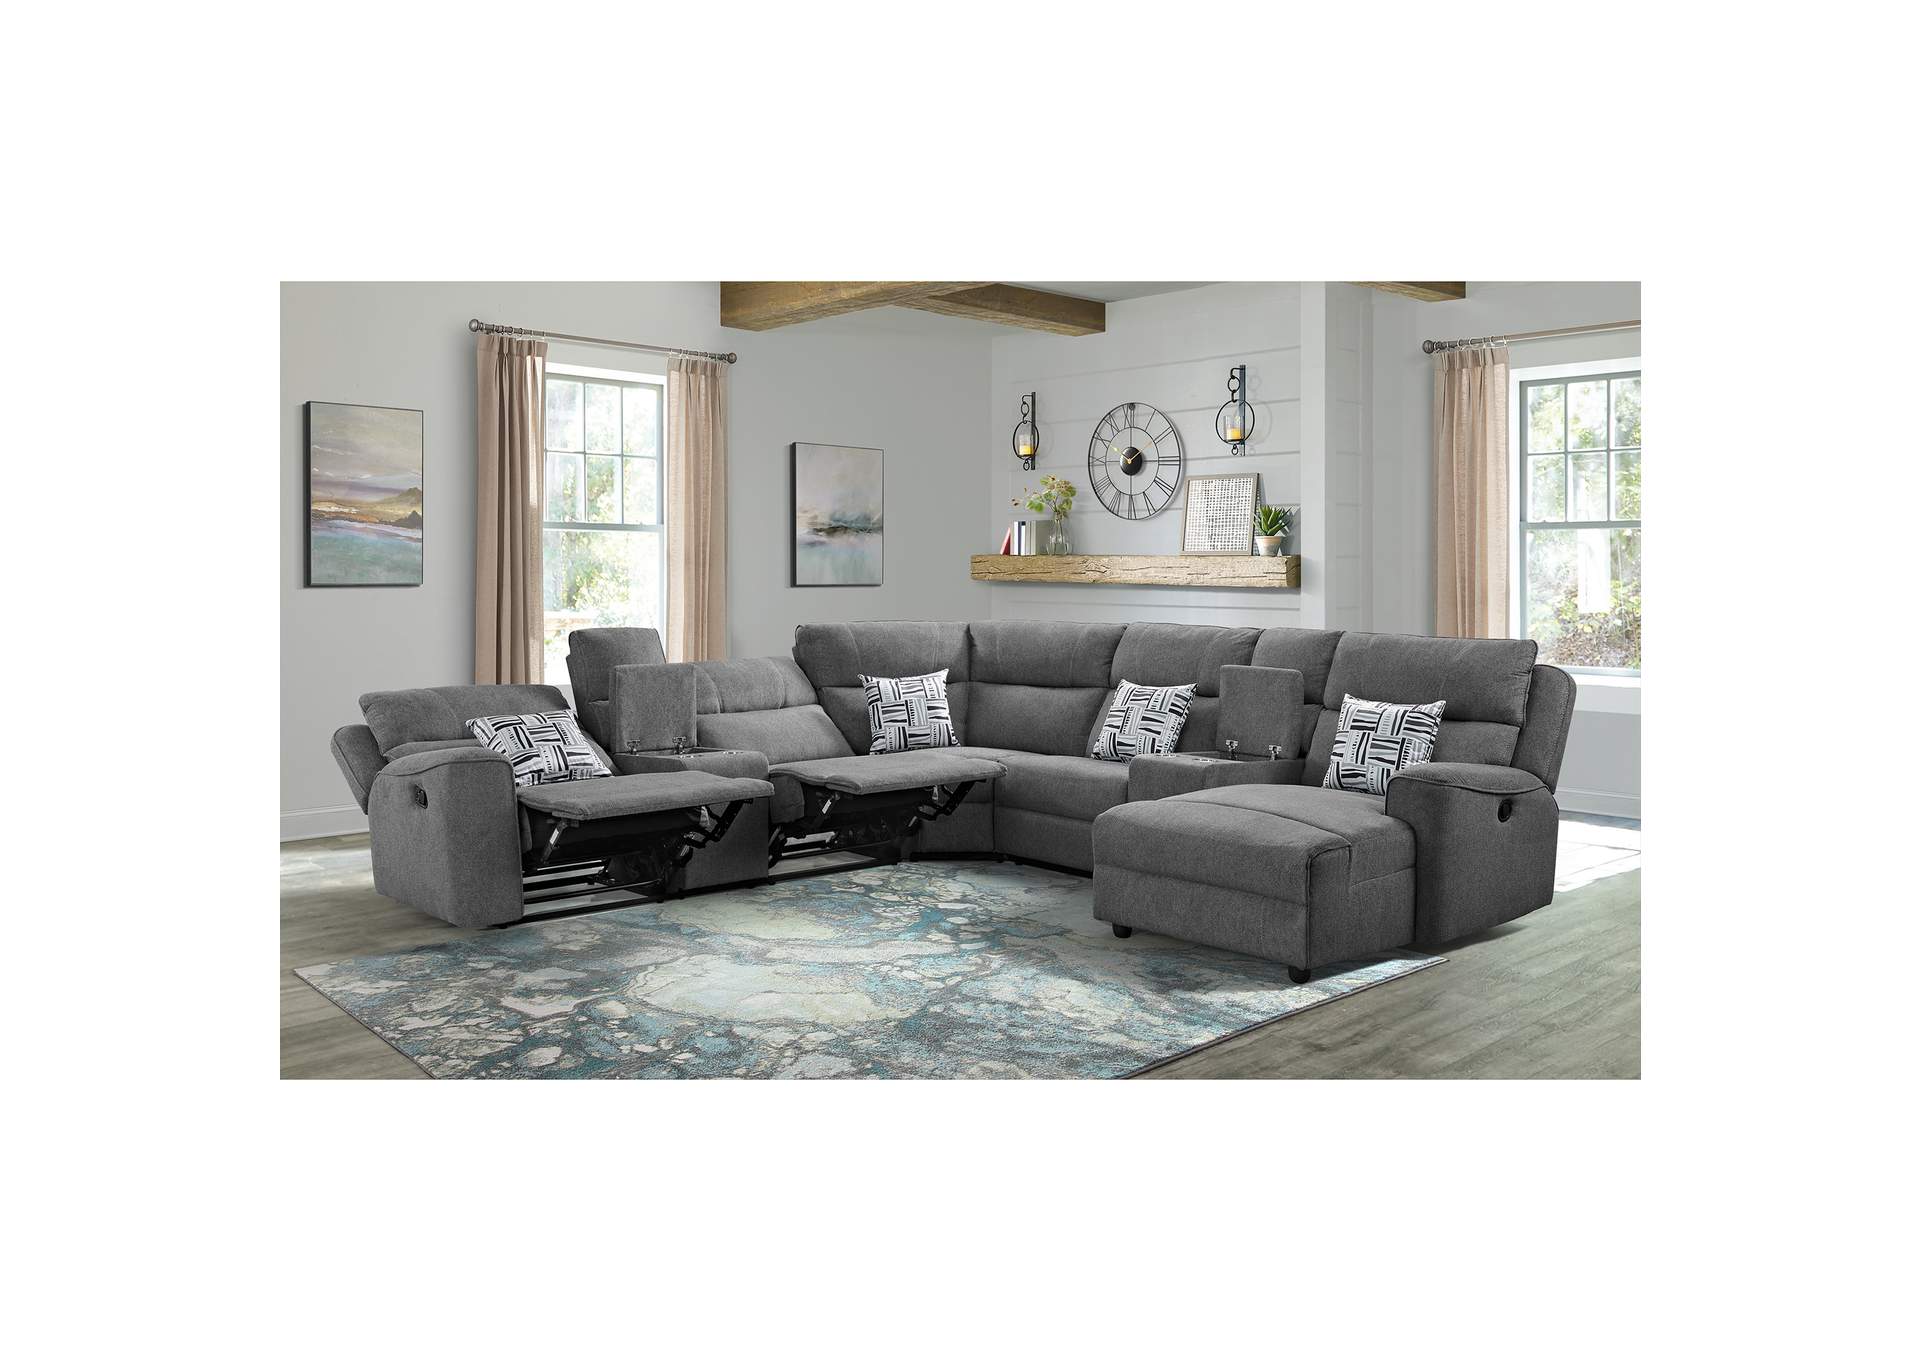 Connery Sectional Left Hand Facing Loveseat With Console In Pewter,Elements